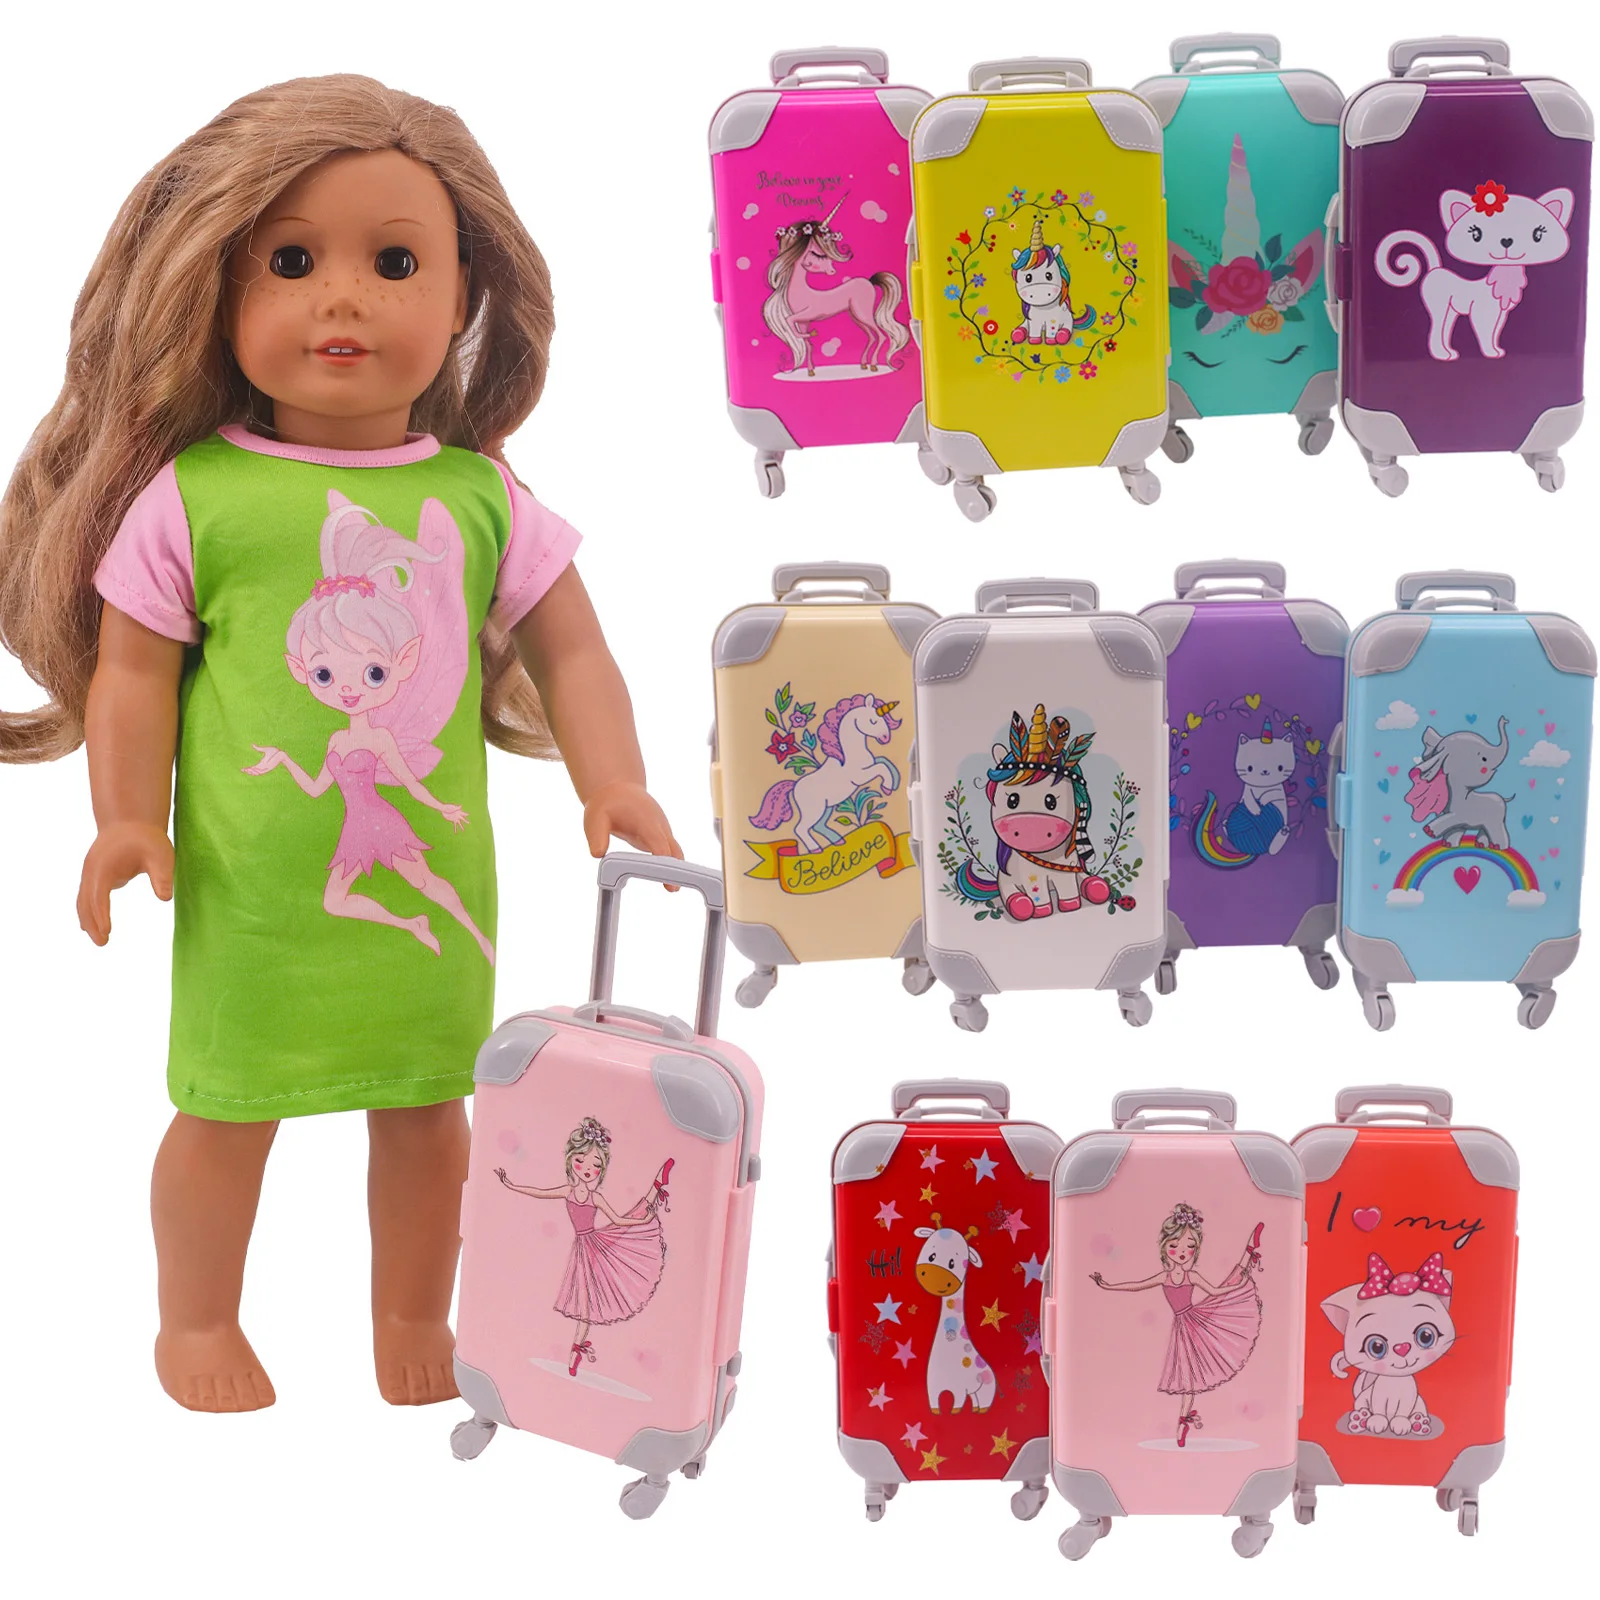 Dollhouse Printed Style Doll Suitcase Fit 18 Inch American And 43cm Reborn Baby Doll Accessories ,Our Generation ,DIY Toys